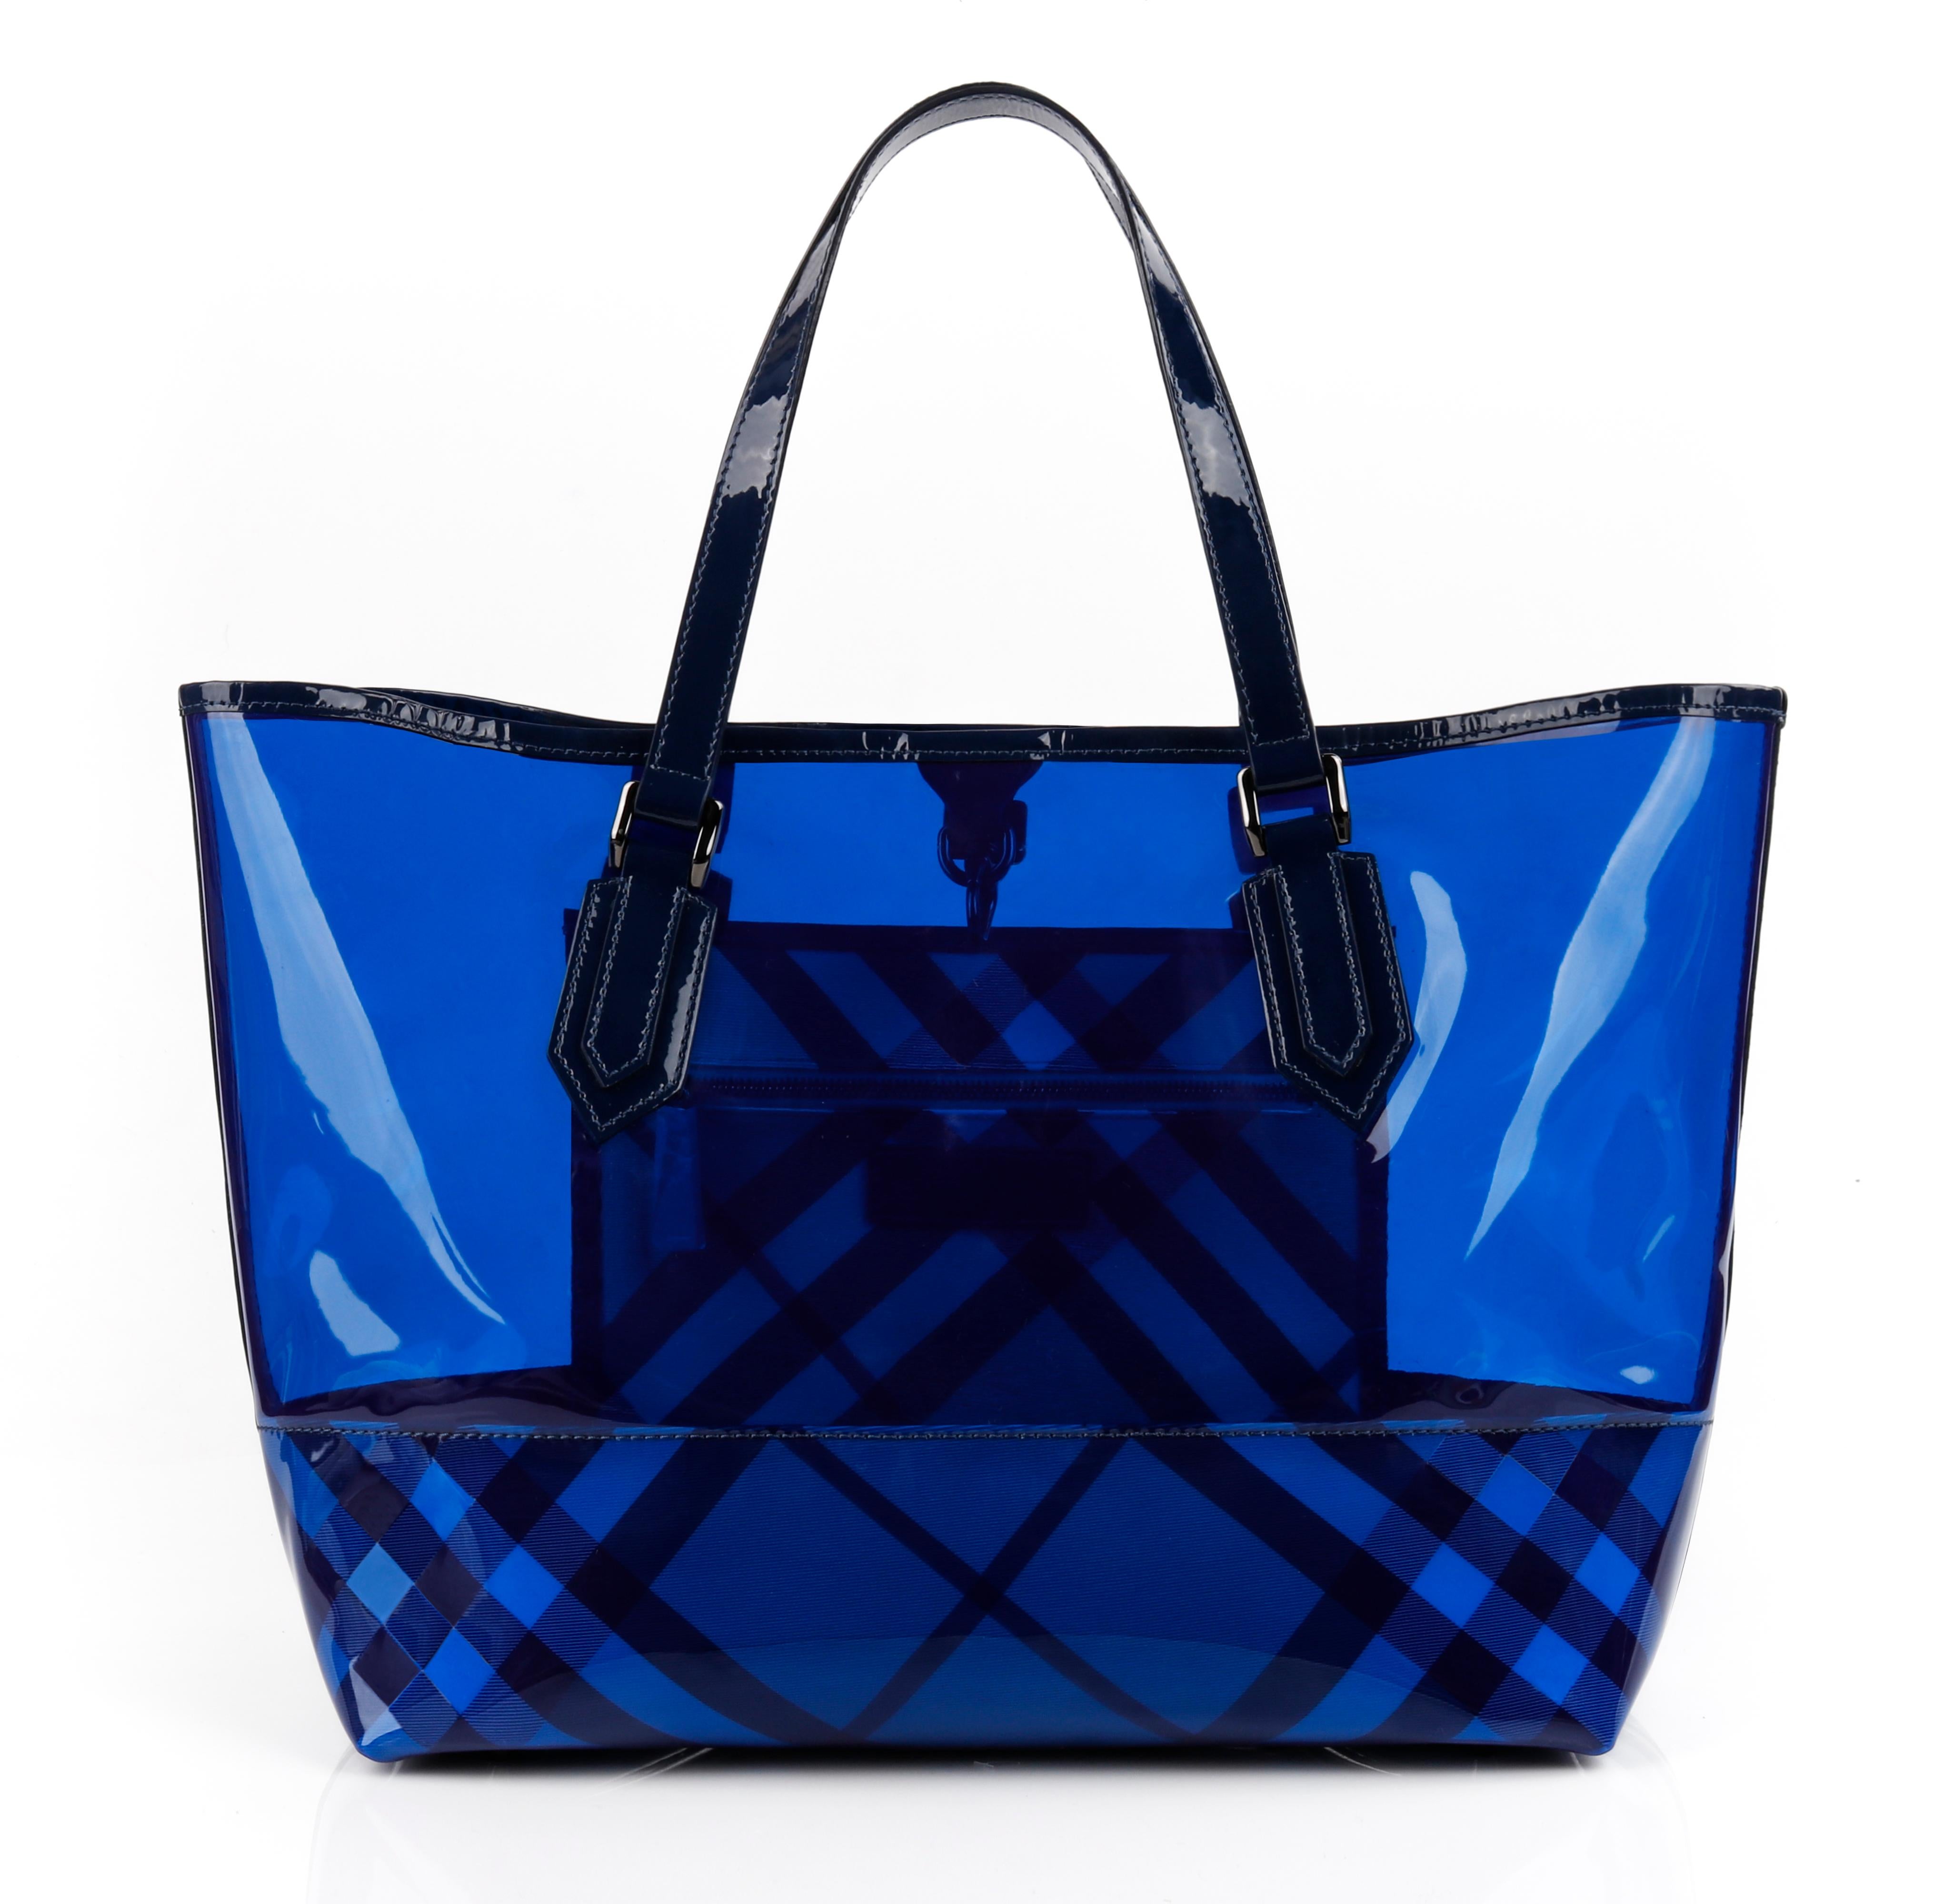 BURBERRY “All Over Perspex” Jet Blue Transparent PVC Tote Bag + Pouch
 
Estimated Retail: $695

Brand / Manufacturer: Burberry
Manufacturer Style Name: All Over Perspex Tote
Style: Tote Bag
Color(s): Jet Blue
Marked Materials: Exterior: 100% PVC;